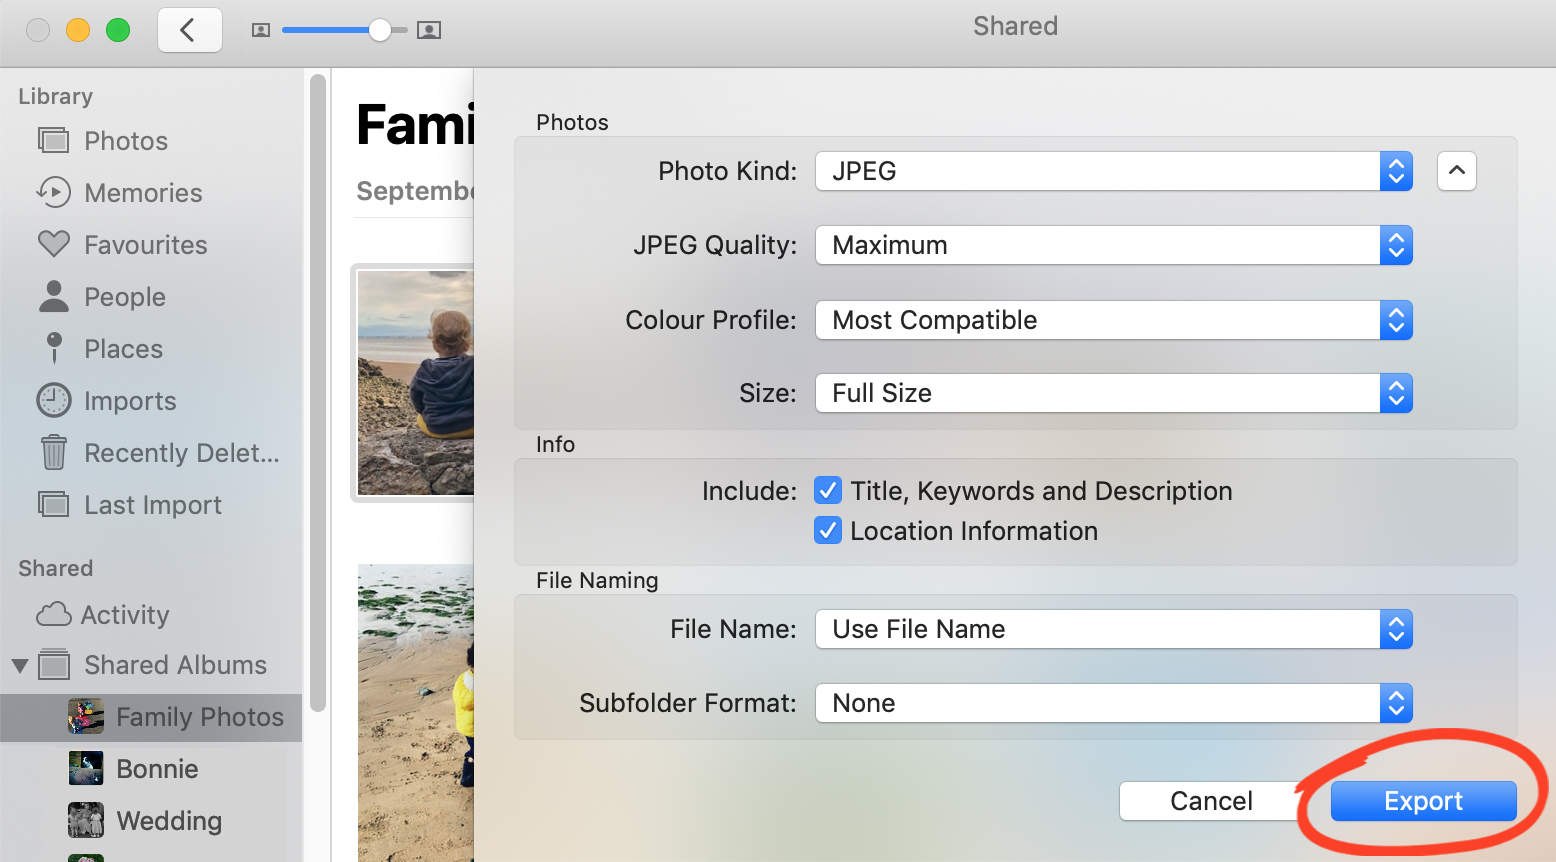 How To Download Photos From iCloud To Your iPhone, iPad Or Computer